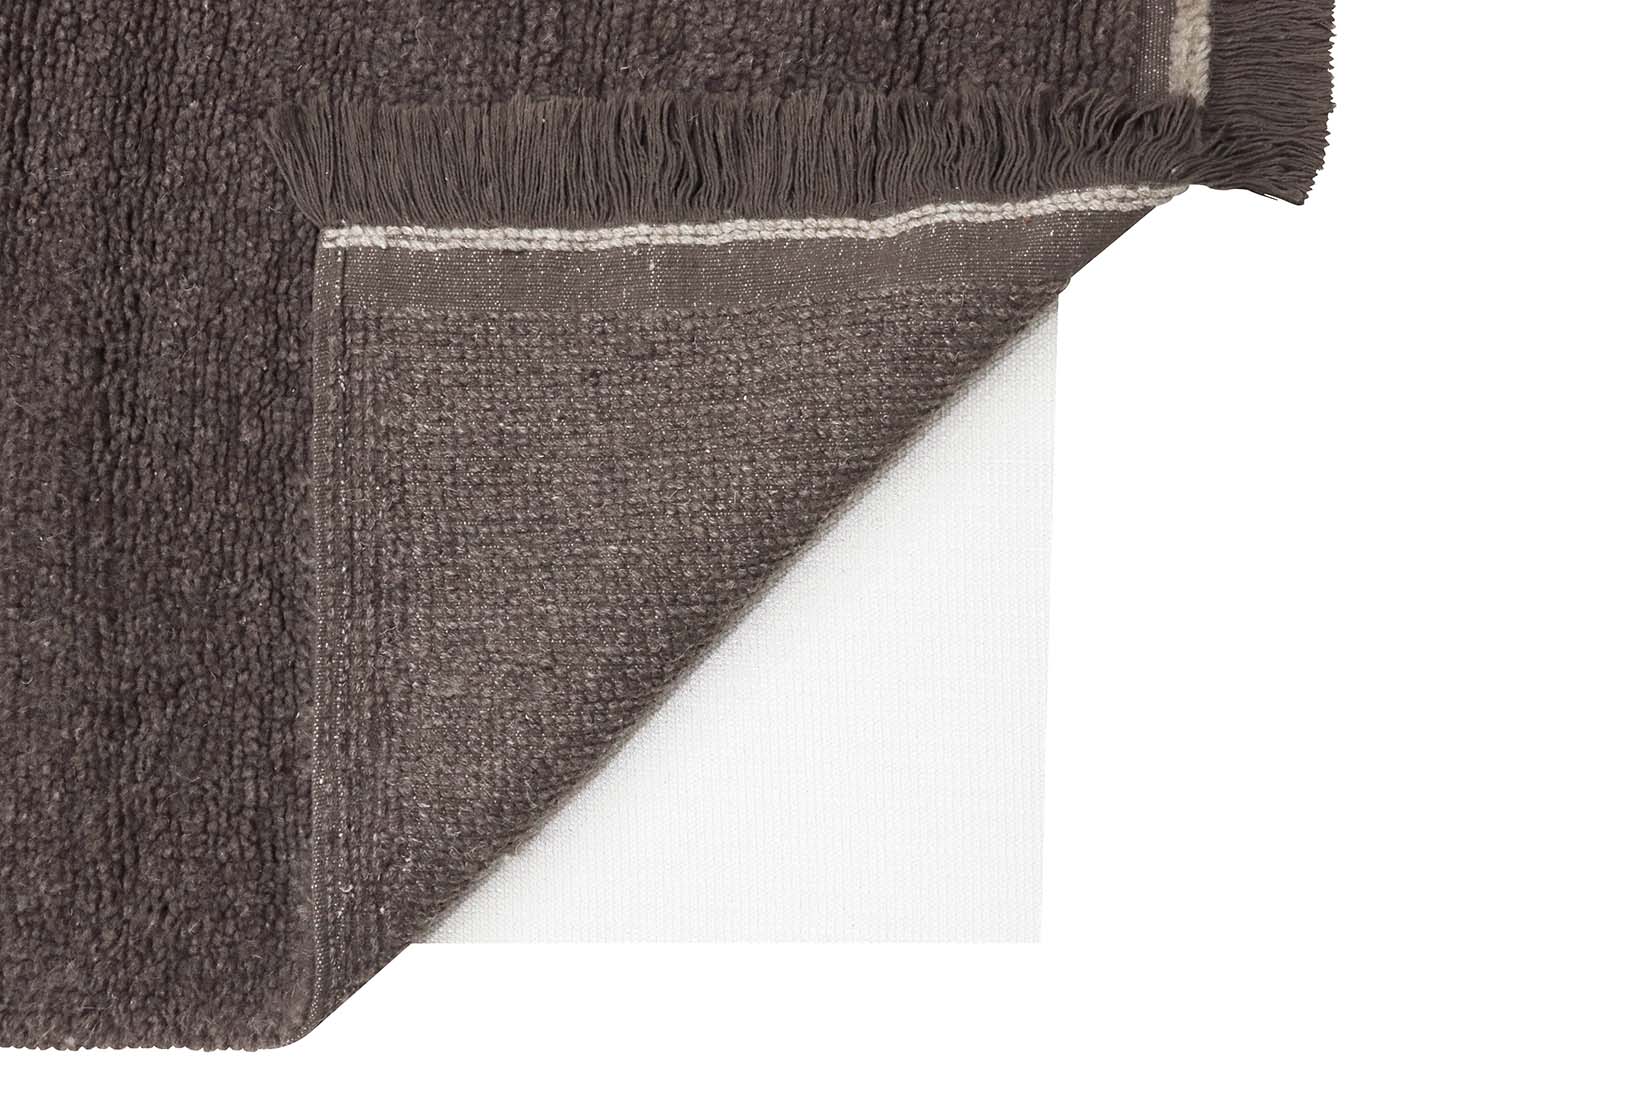 brown washable wool runner with textured detail
